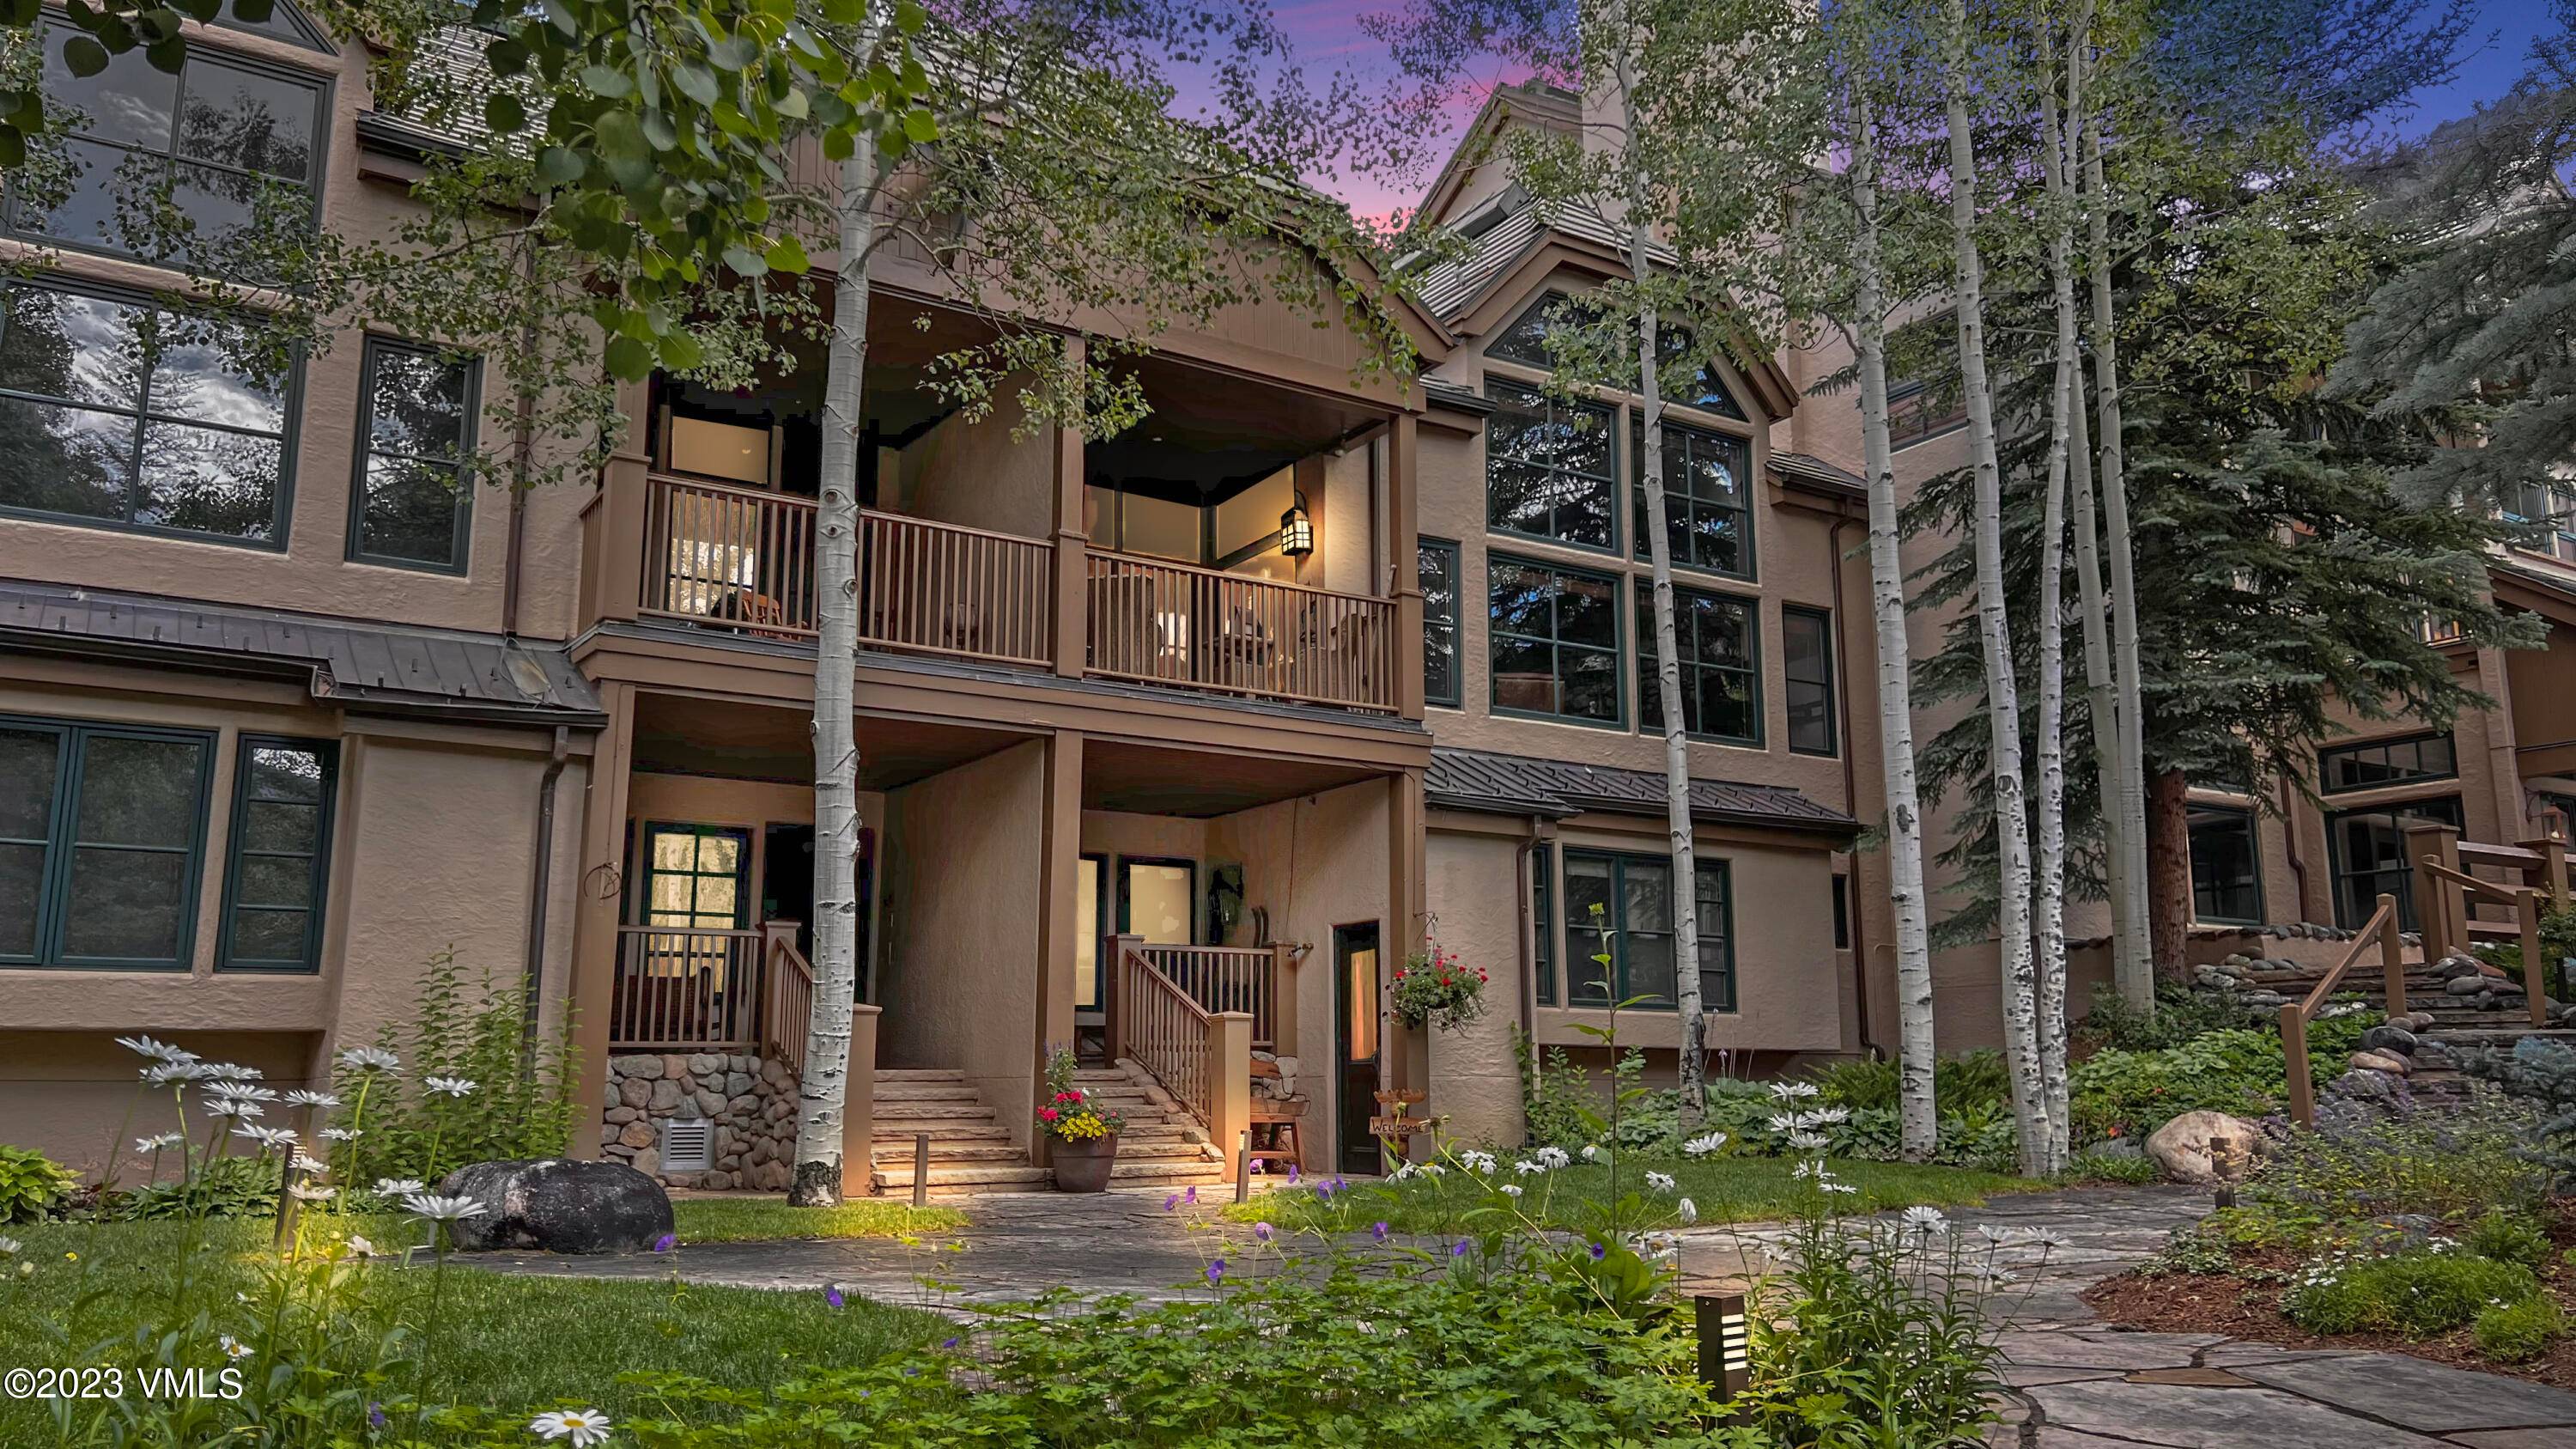 Within Beaver Creek Colorado, recognized as one of the world's most prestigious resort communities, lies SaddleRidge Villas, the perfect year round vacation home.